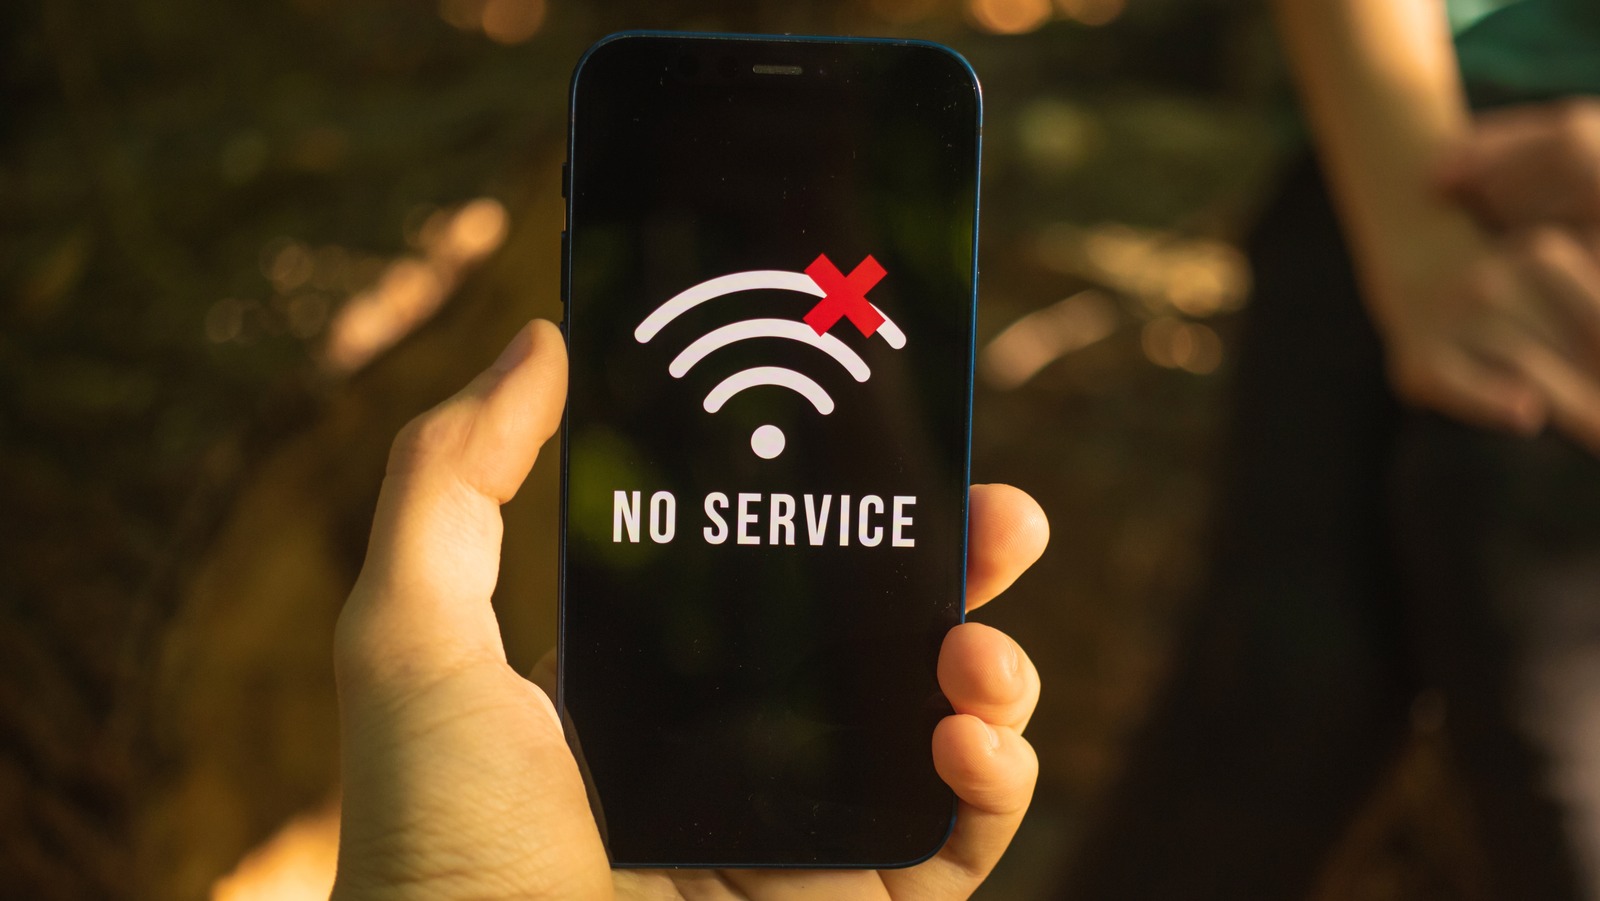 Why Does My Android Phone Say No Service When I Have Service